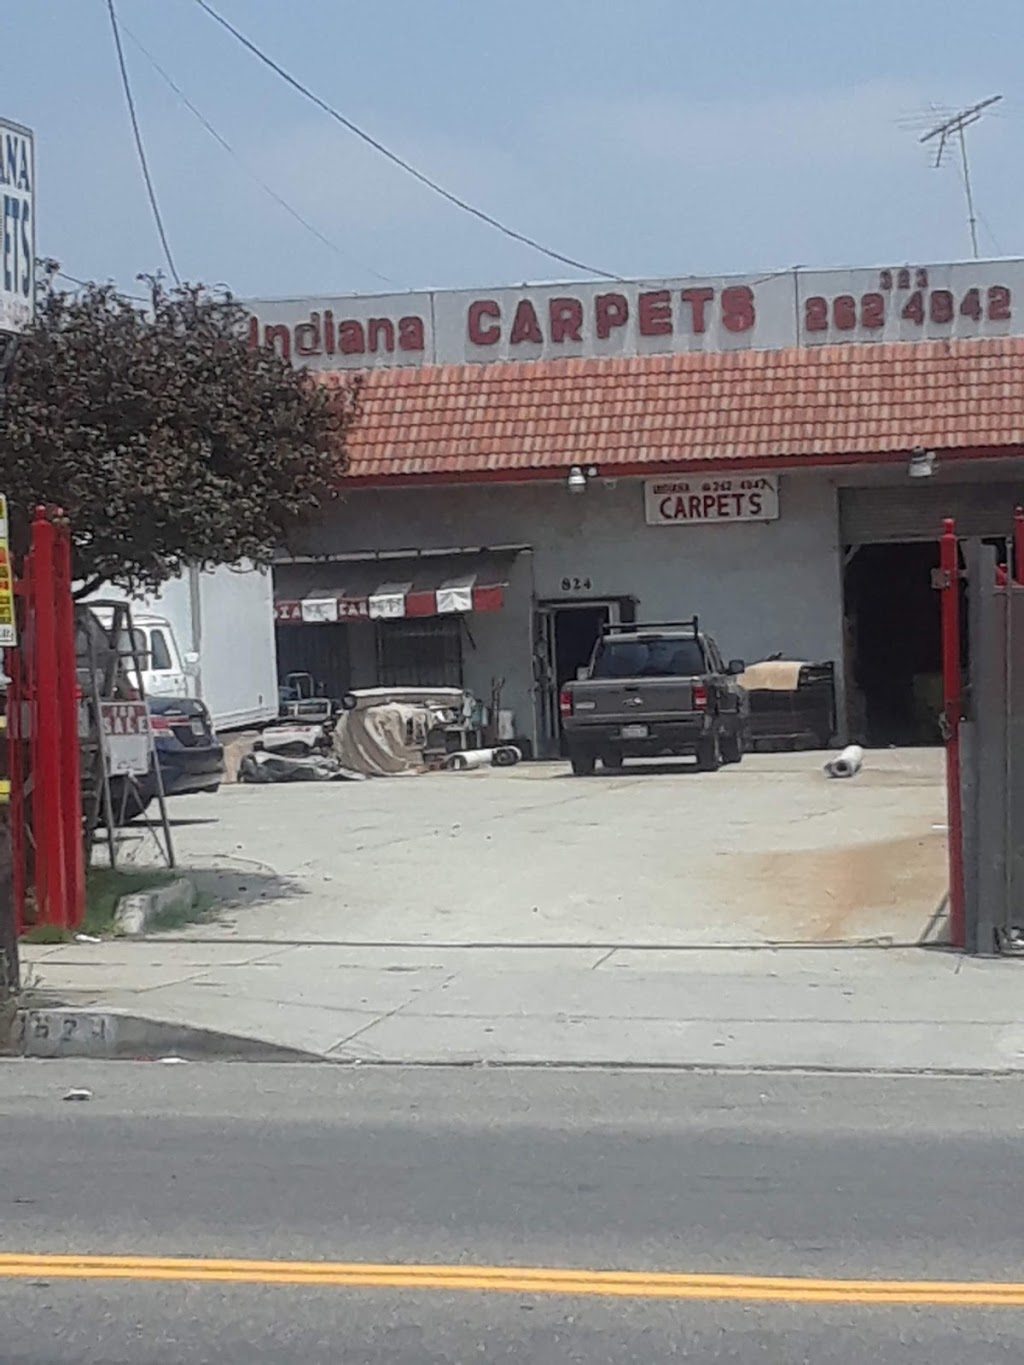 Indiana Carpet & Supplies | 824 S Indiana St, Los Angeles, CA 90023 | Phone: (323) 262-4842